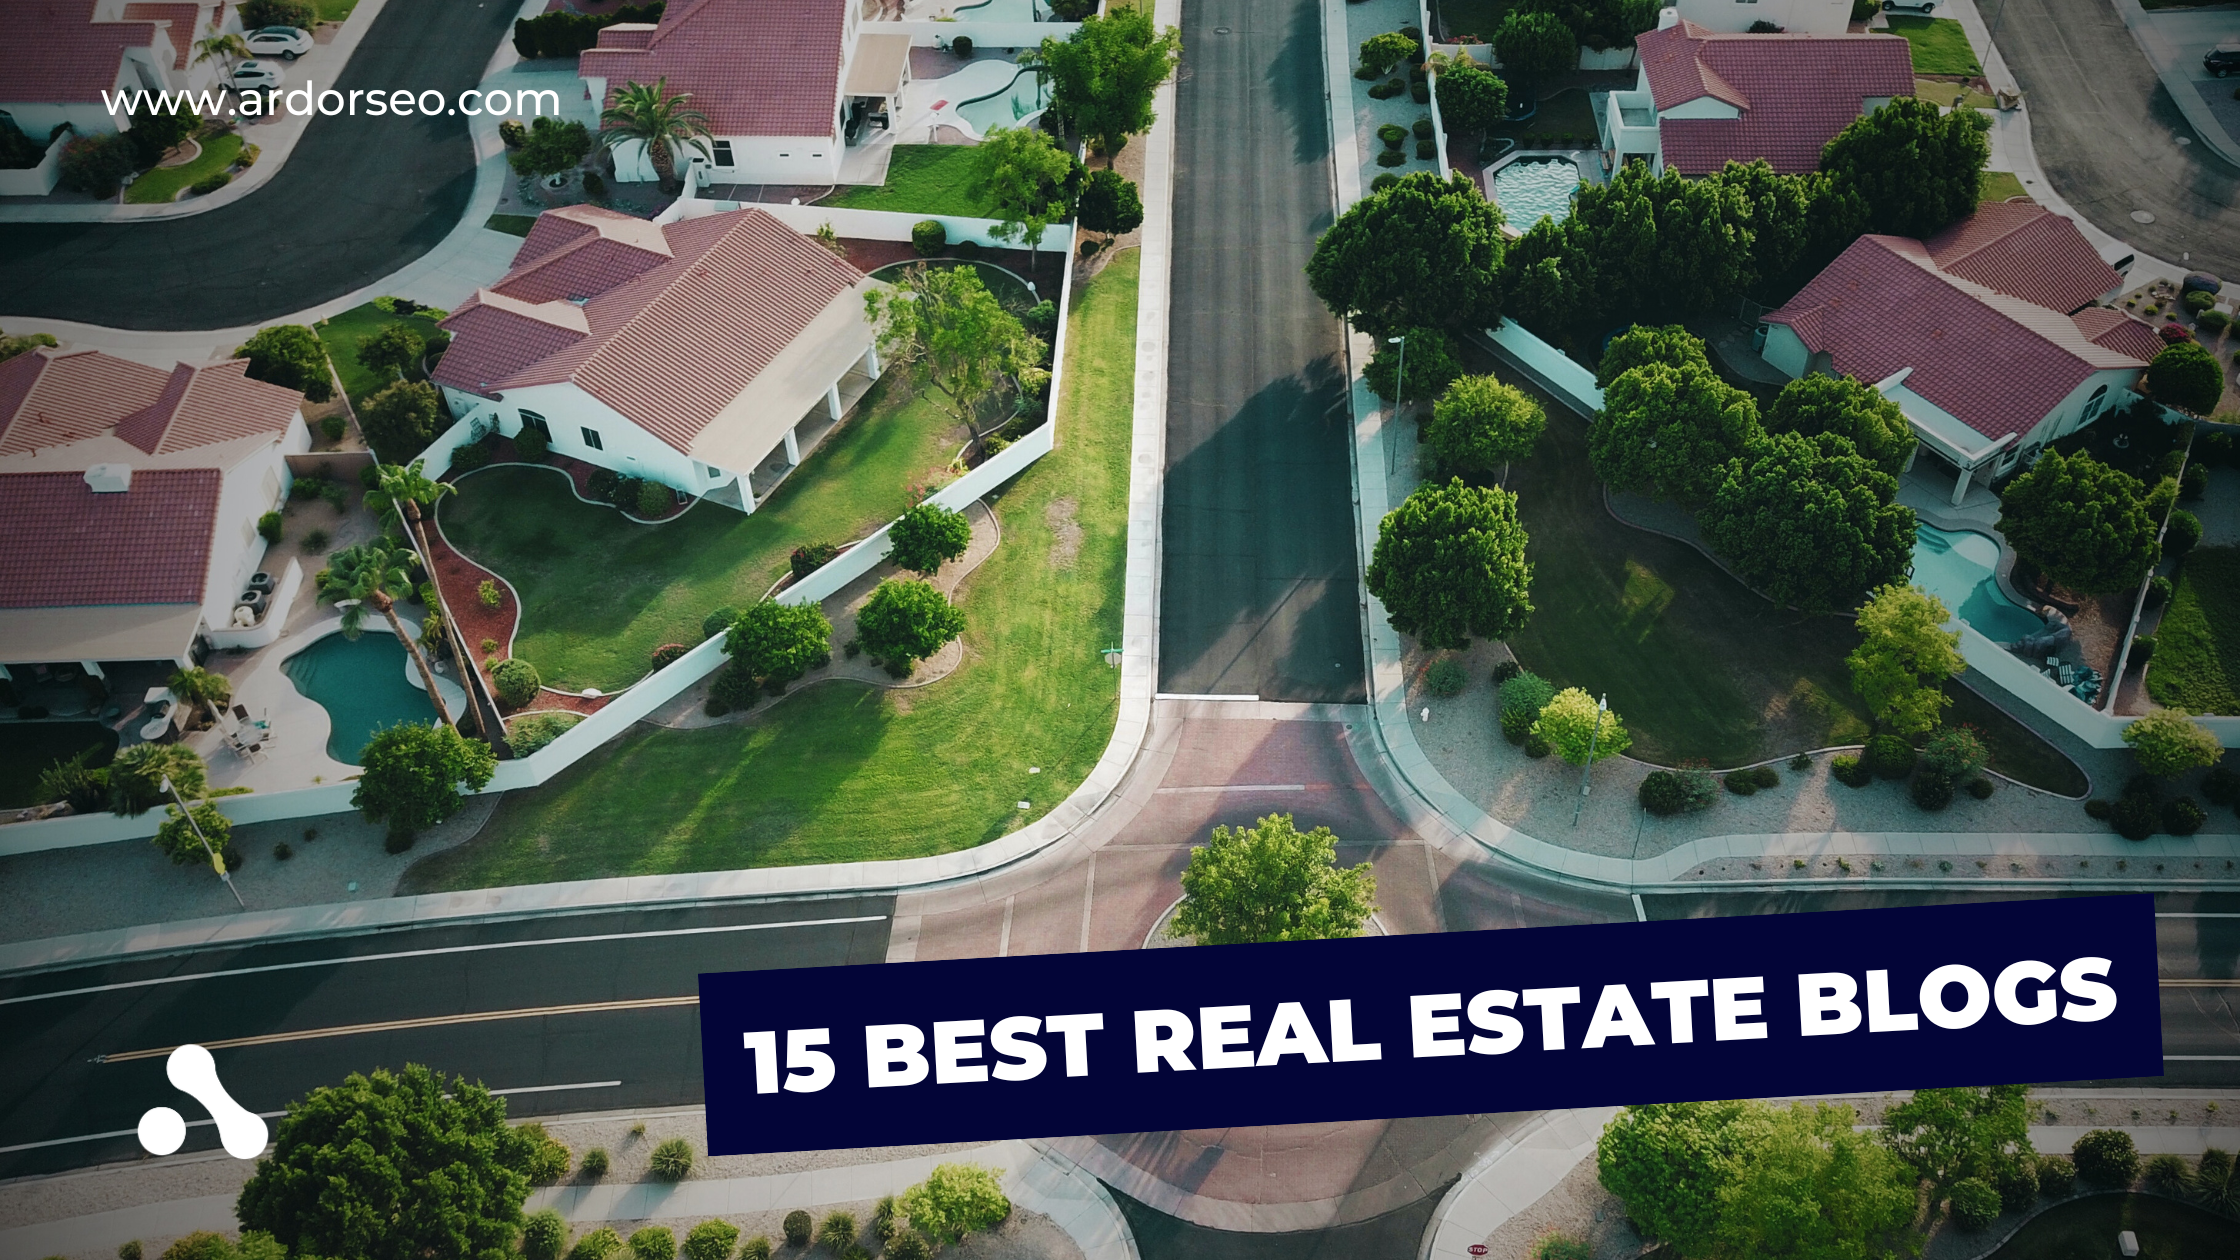 Whether you're an agent or real estate investor, this list is for you.